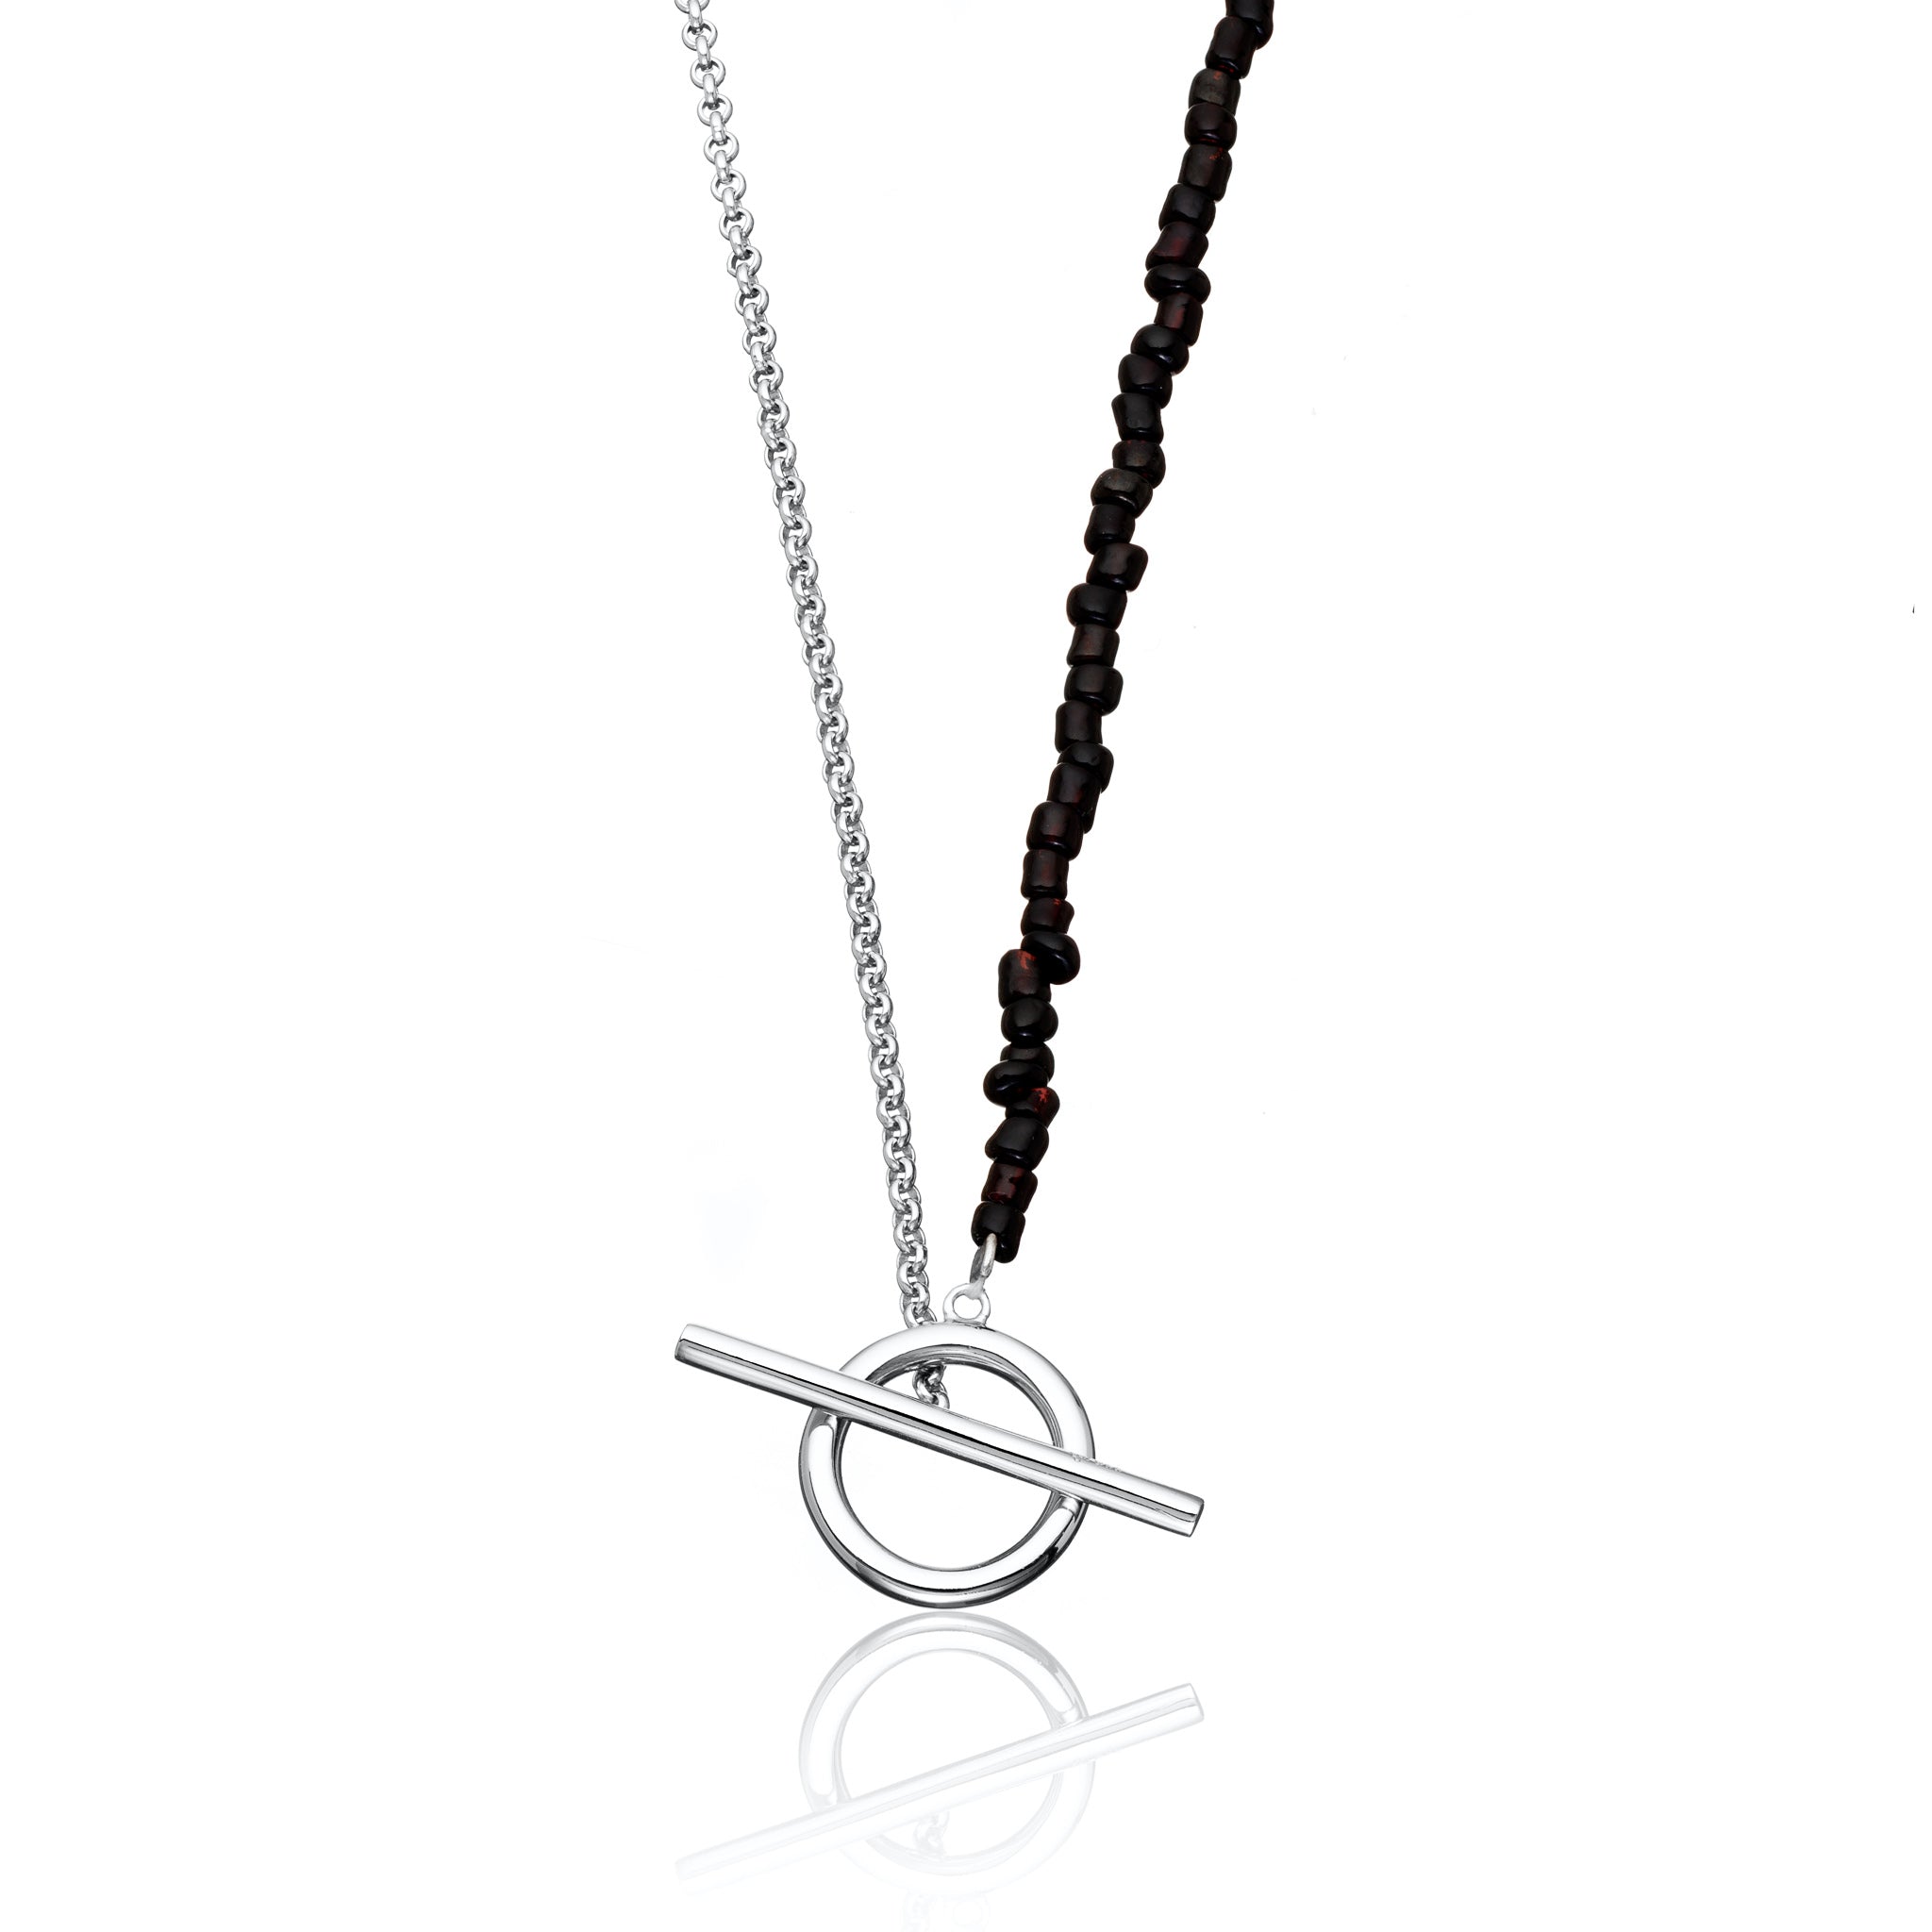 Black Bead and Chain T-Bar Necklace | Black Bead Chain Necklace | Scream Pretty